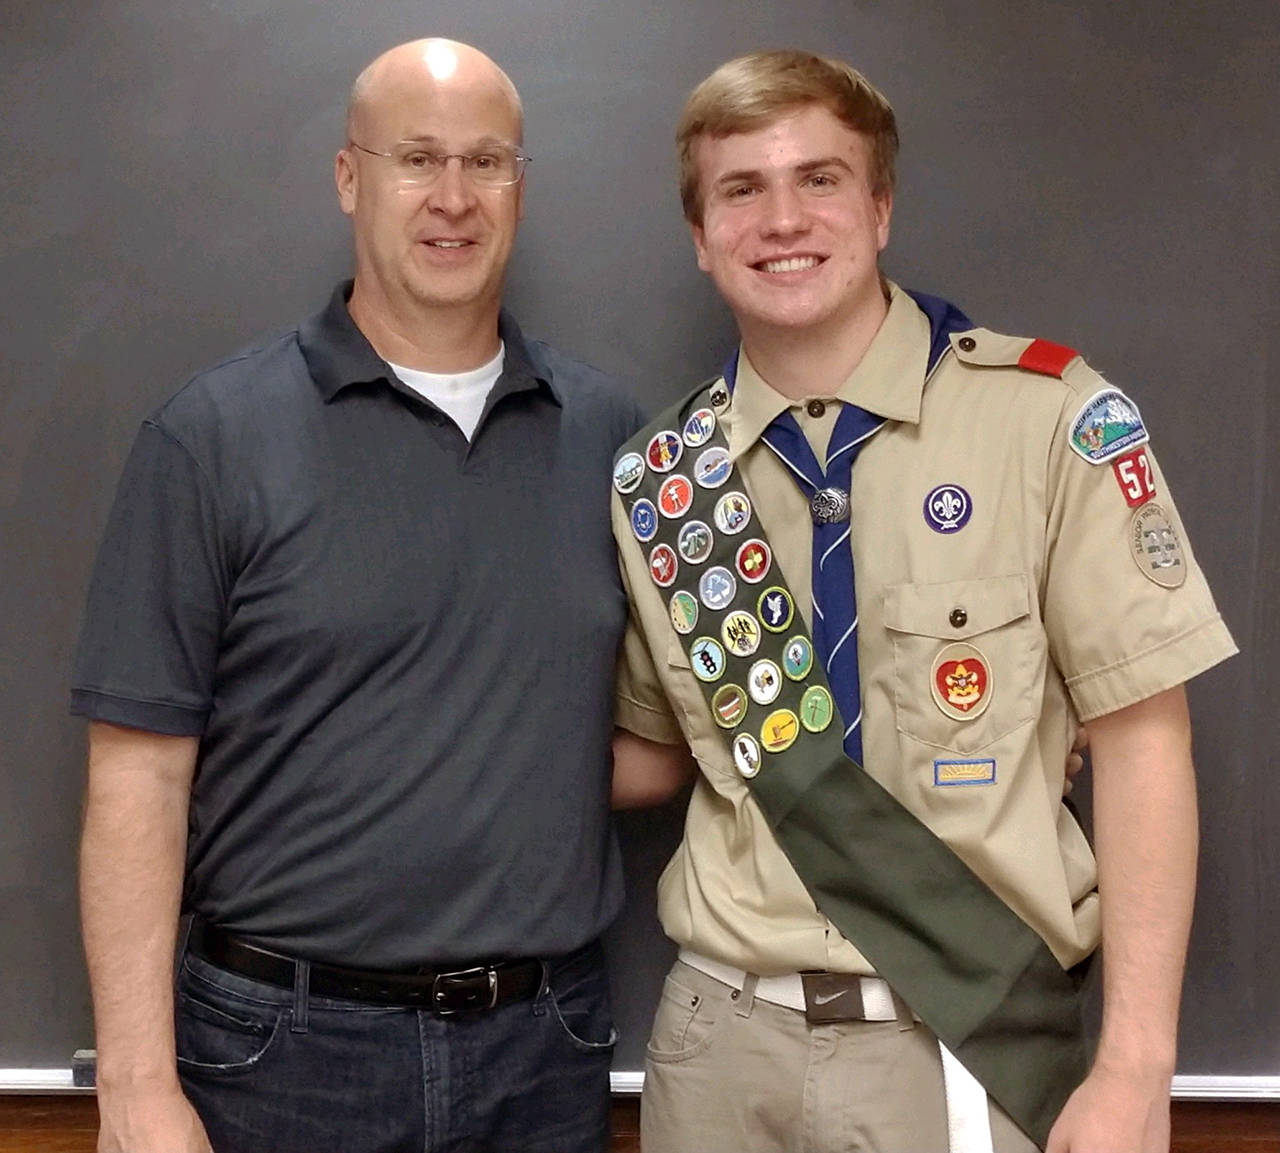 Courtesy photo                                Nick Farrer, the son of Ryan and Erin Farrer of Aberdeen, earned his Eagle Scout award this past week. He’s pictured here with his dad. Nick, a member of Troop 4052, graduated from Aberdeen High School this spring with honors. His Eagle project involved veterans recognition at Forest Hill Cemetery in Cosmopolis.